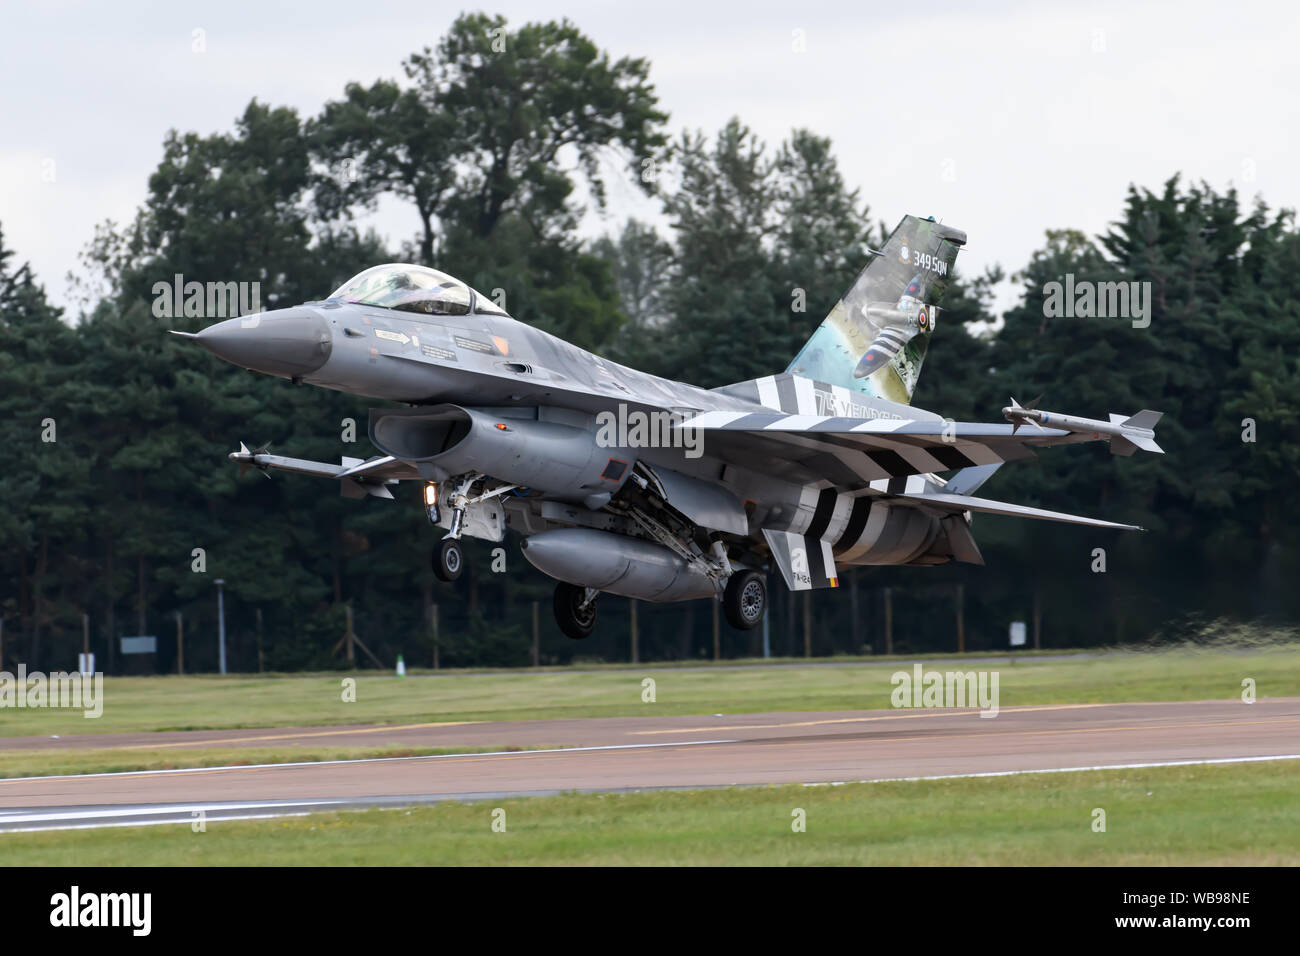 F-16 Fighting Falcon Jet Aircraft Banque D'Images